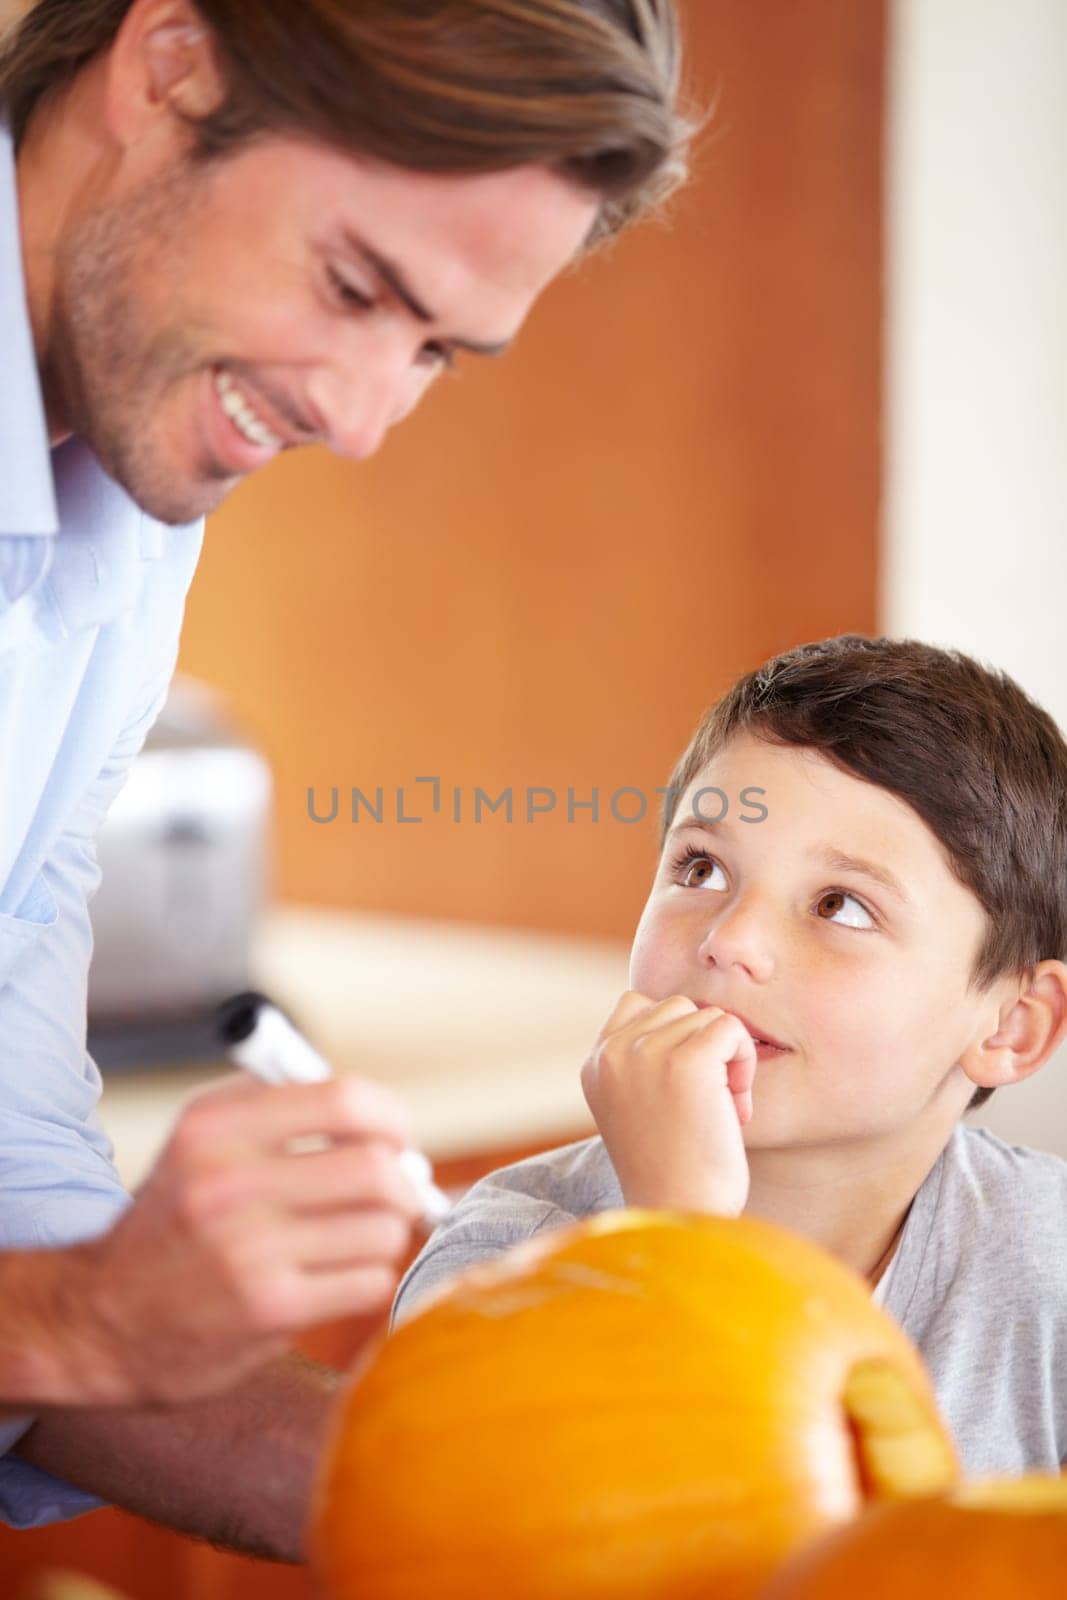 Halloween, pumpkin and father with child in the kitchen for holiday celebration at home. Creative, smile and happy dad with boy kid bonding and carving vegetable for decoration or tradition at house